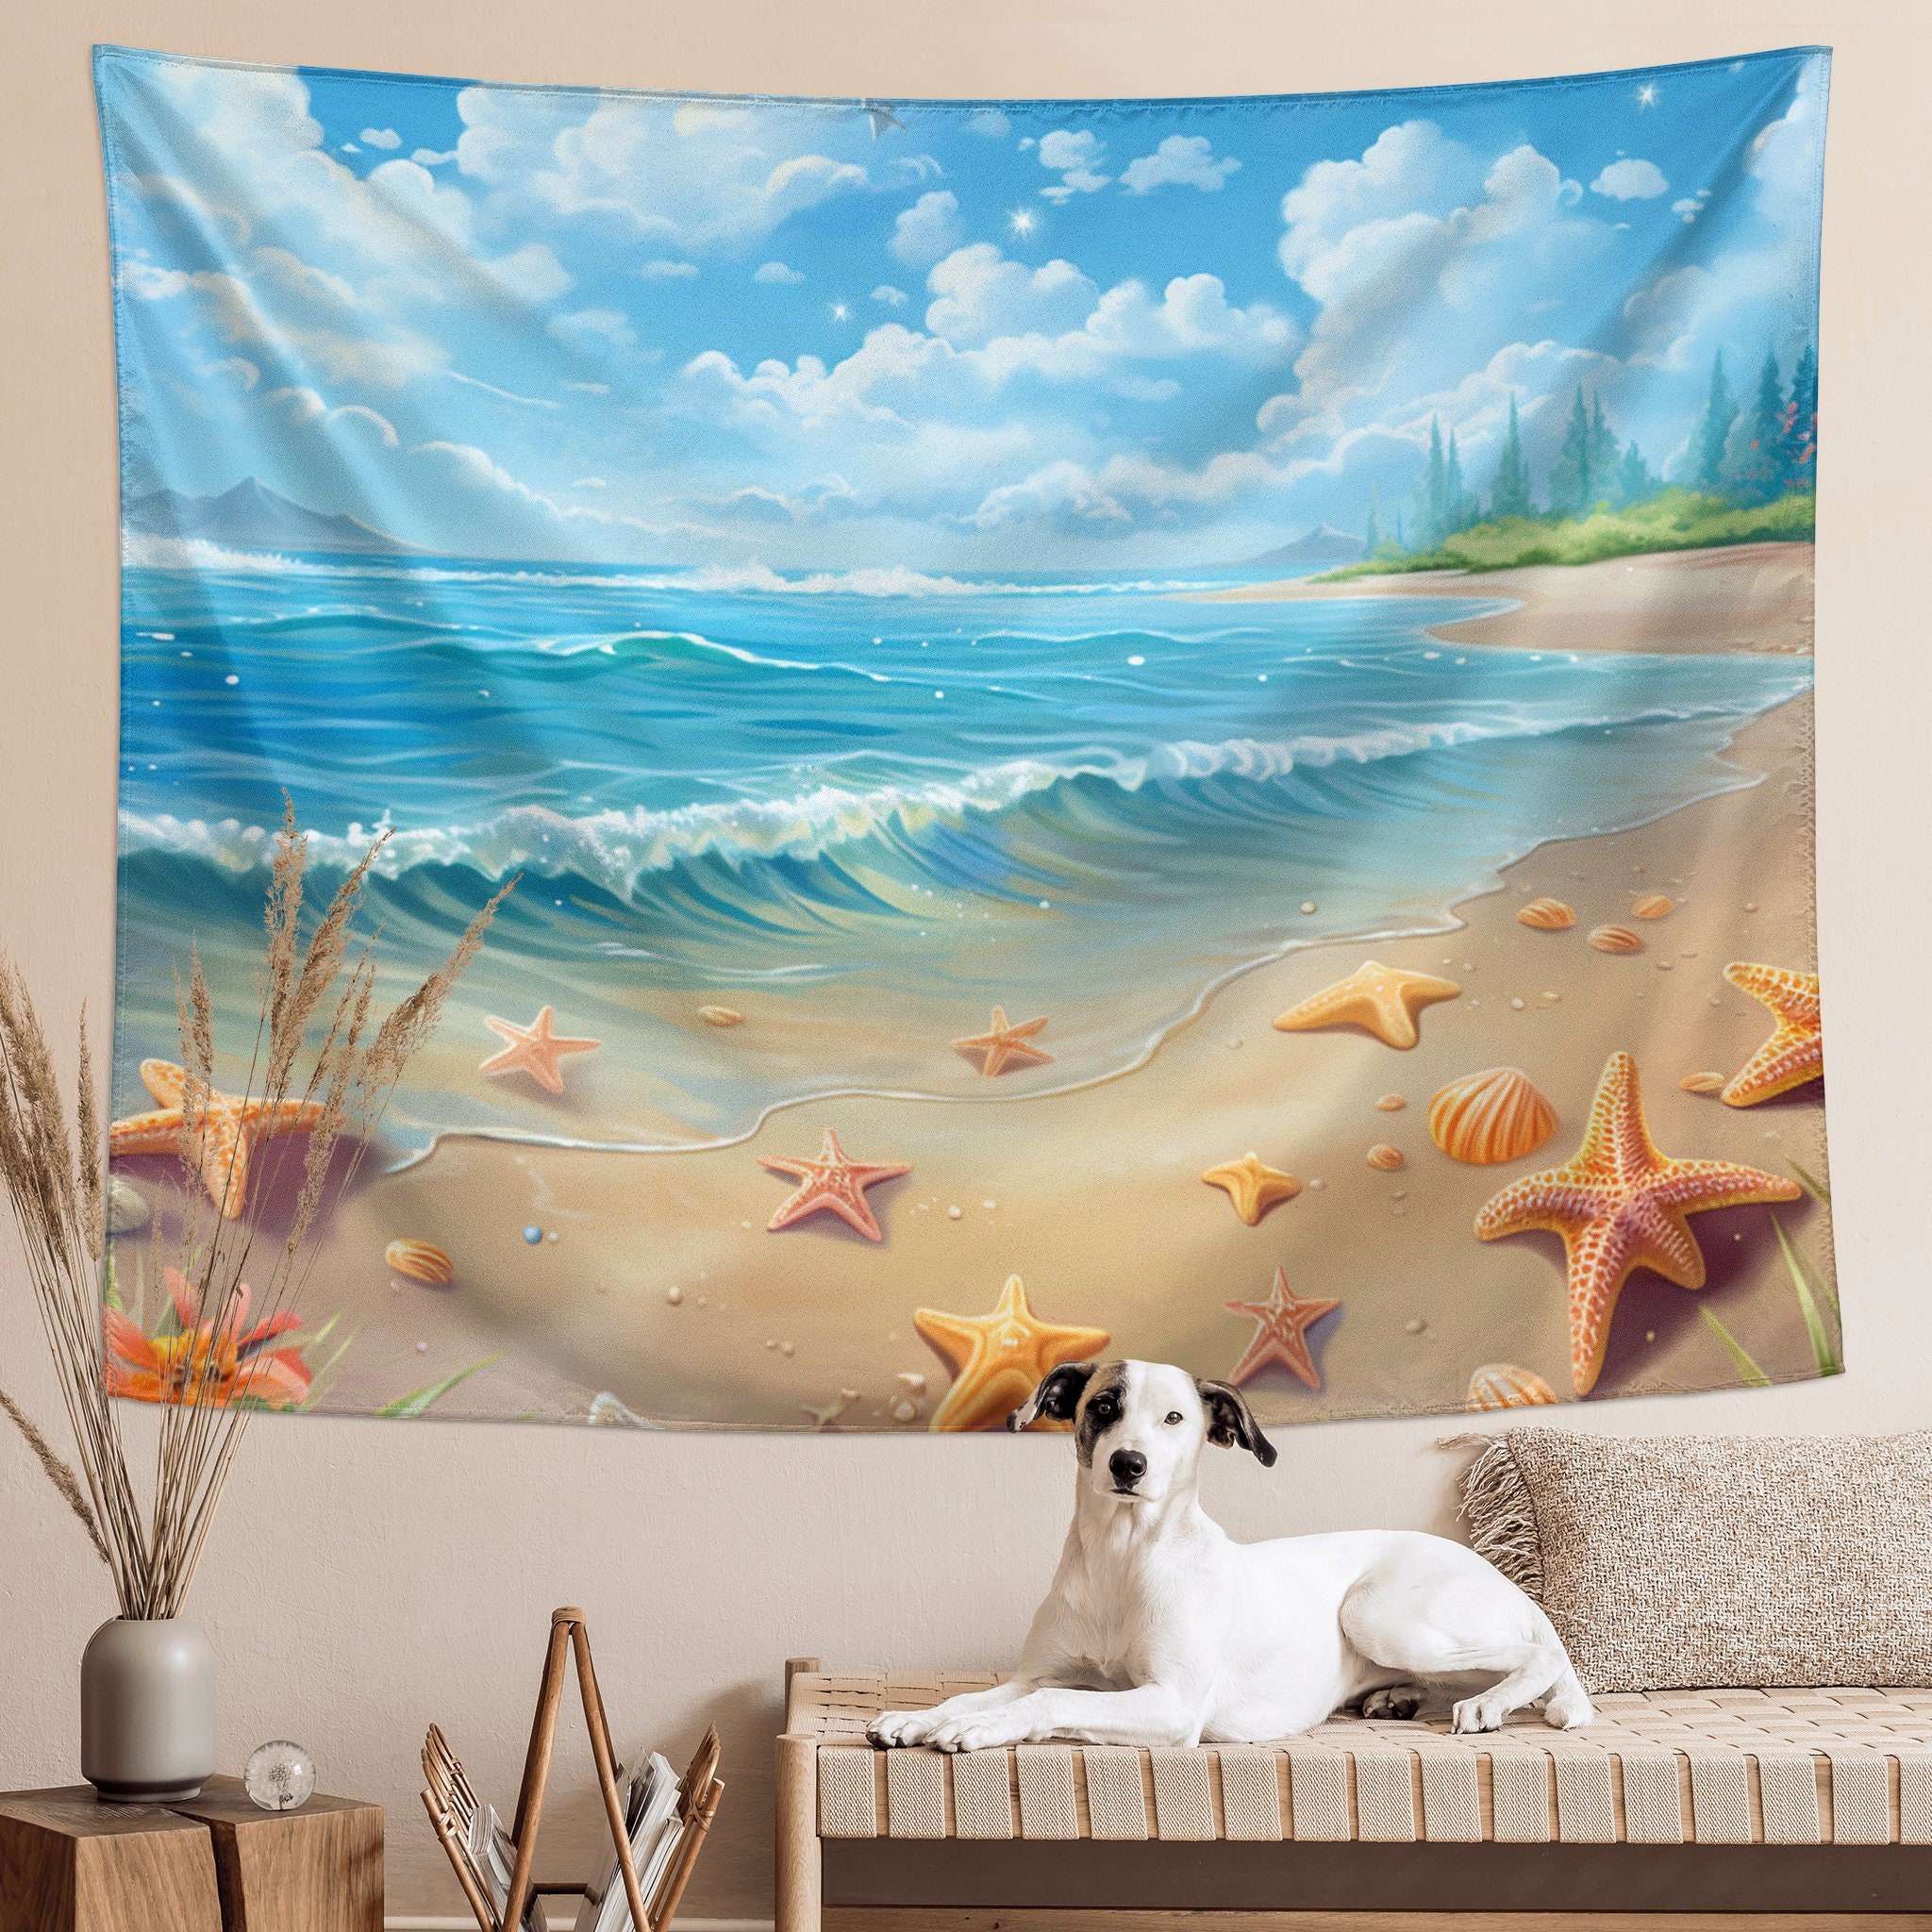 Ocean Beach Tapestry Summer Tropical Beach Tapestry Tropical Island Palm Tree Nature